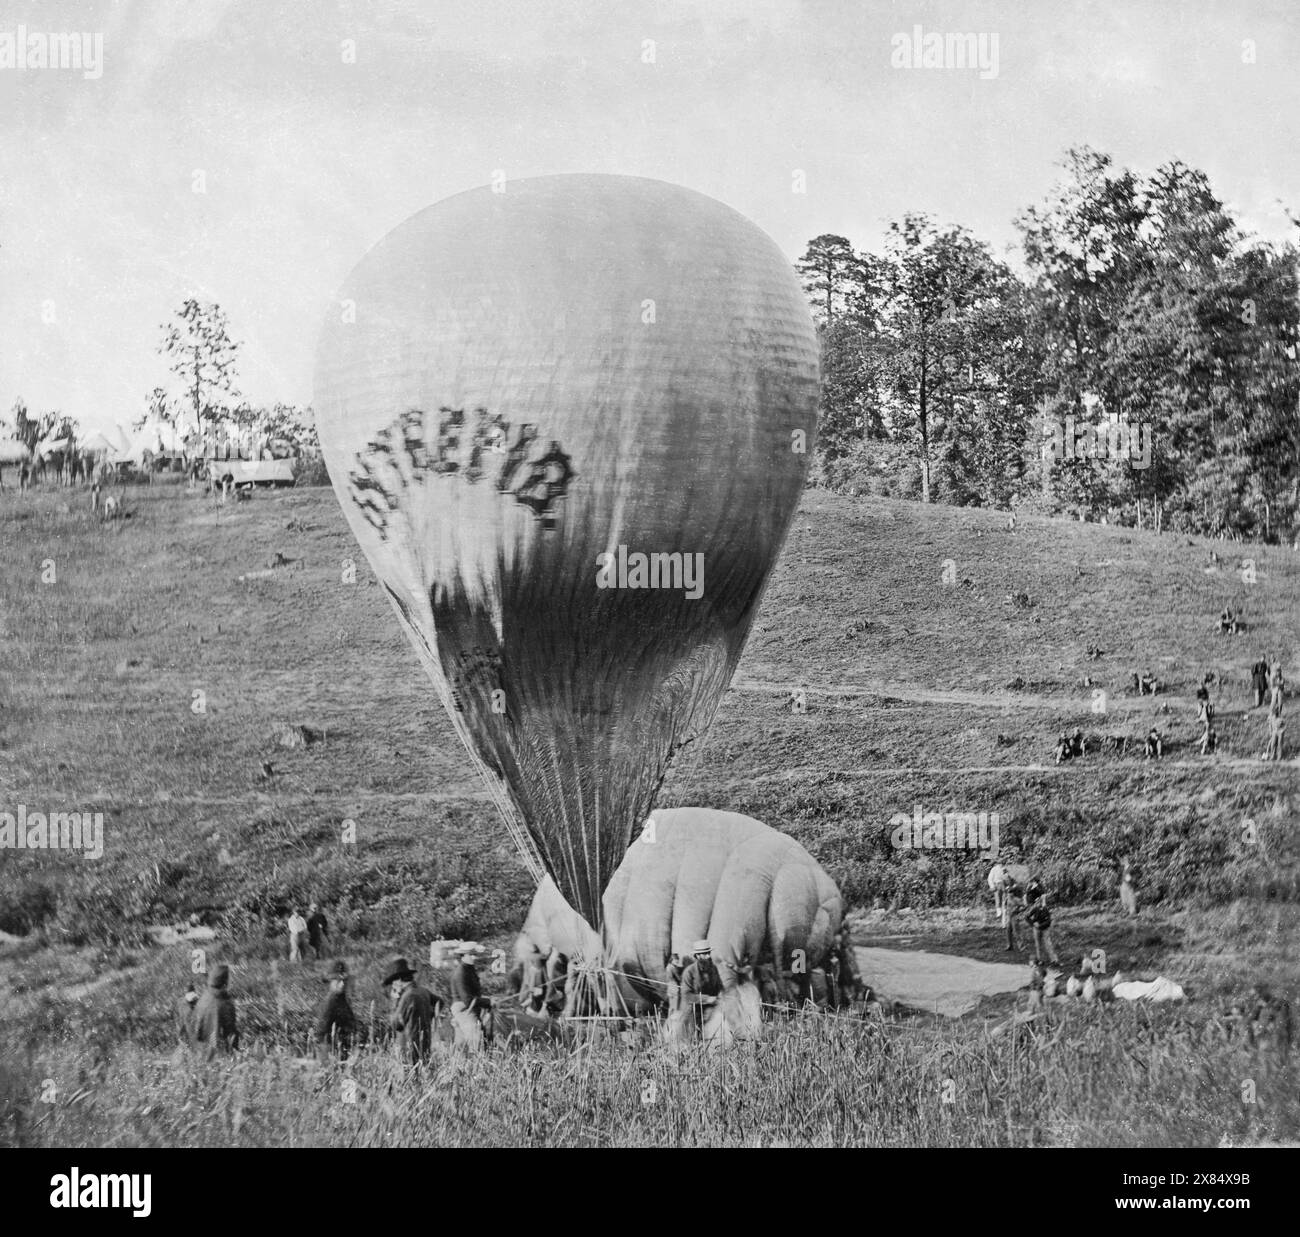 Intrepid being cross-inflated from Constitution, the smaller balloon, in a spur-of-the-moment attempt to get the larger balloon in the air to overlook the imminent Battle of Fair Oaks, May 1862, during the American Civil War. The balloon Intrepid, one of six to eventually be constructed by Thaddeus Lowe and the Union Army Balloon Corps. By Mathew Brady. Please note that this image is a composite of two stereographs. Stock Photo